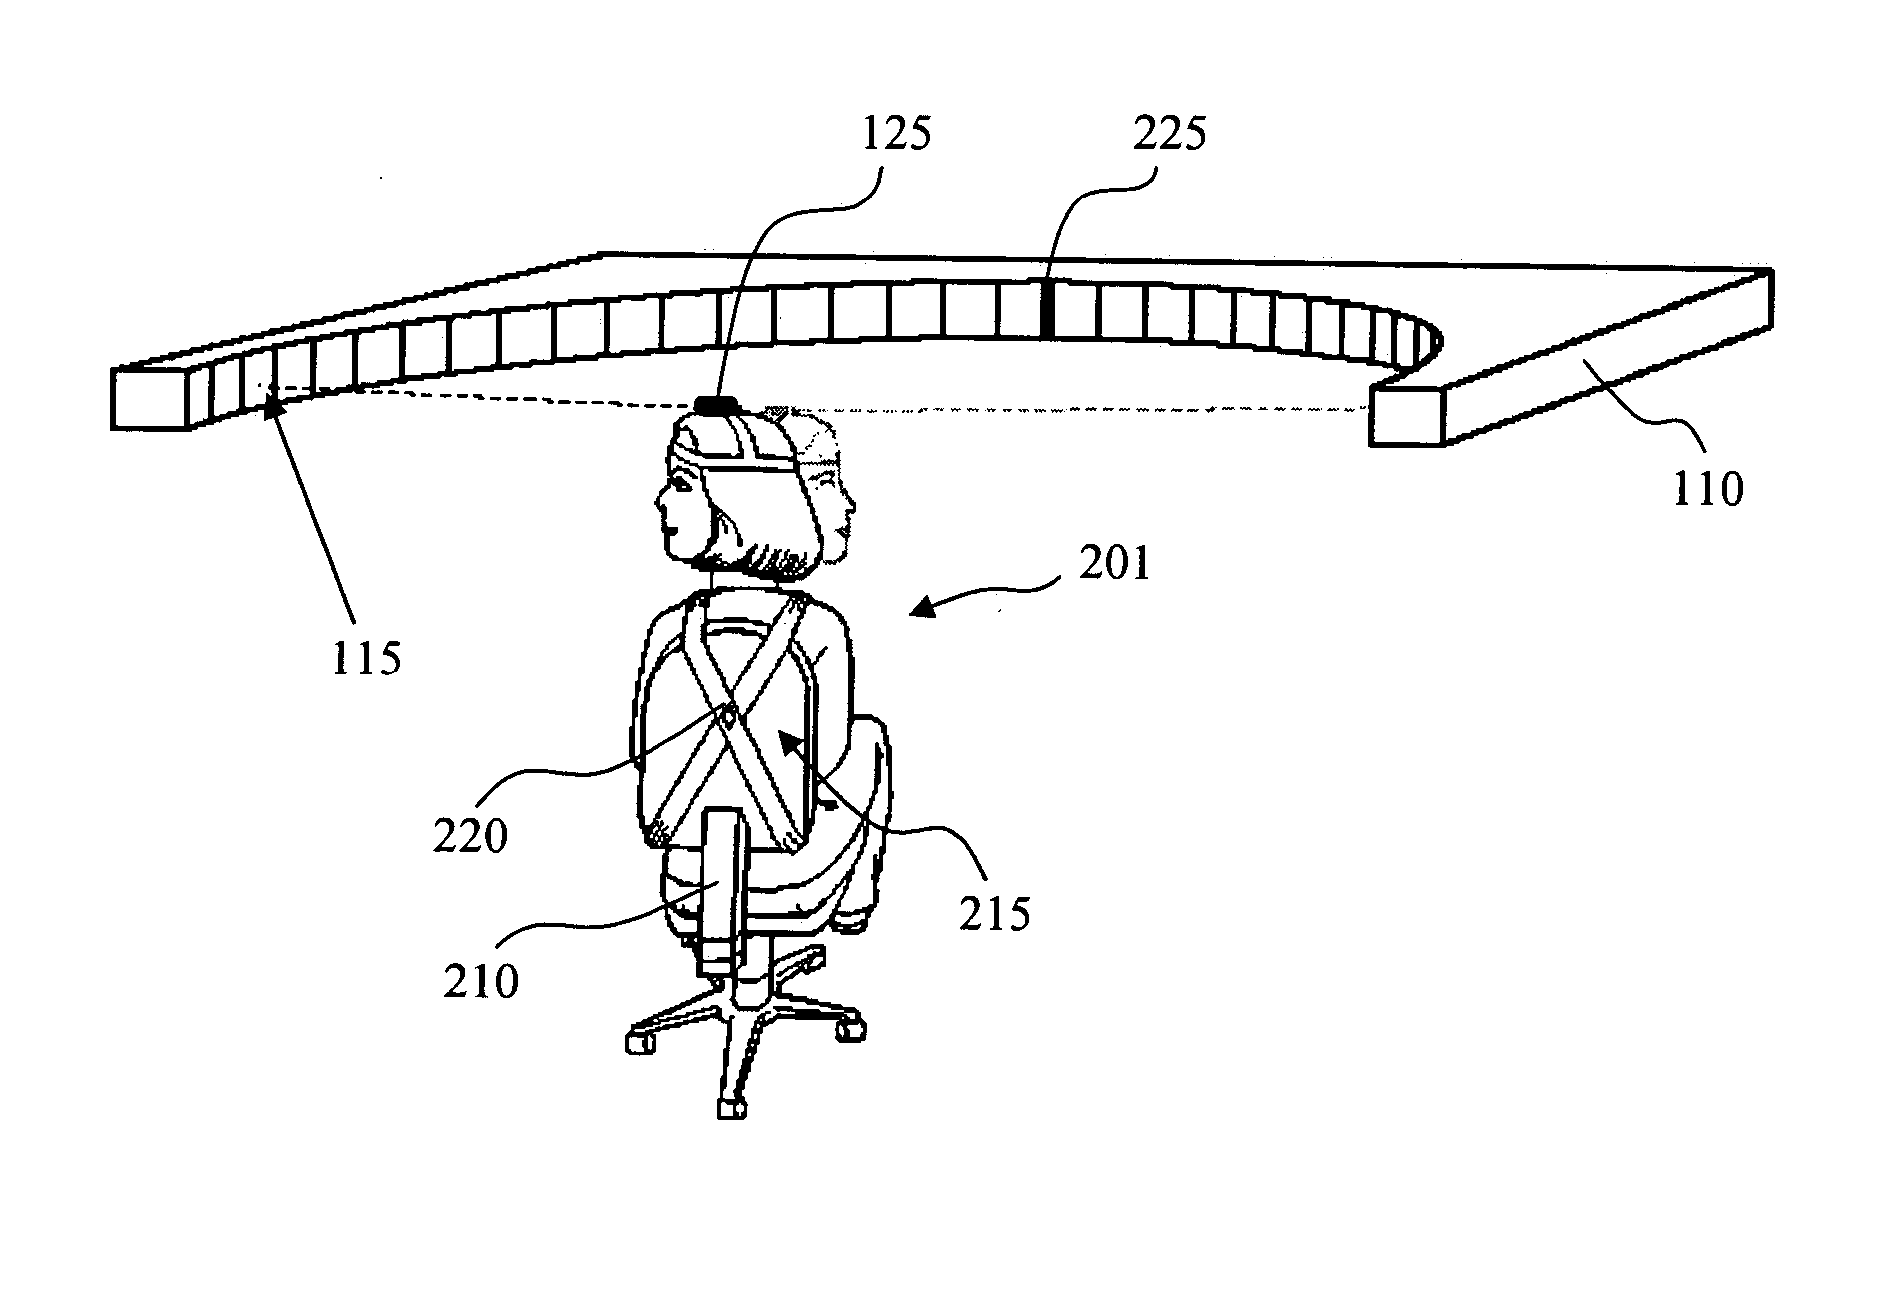 Methods and systems for monitoring range of motion for a patient's head and neck area